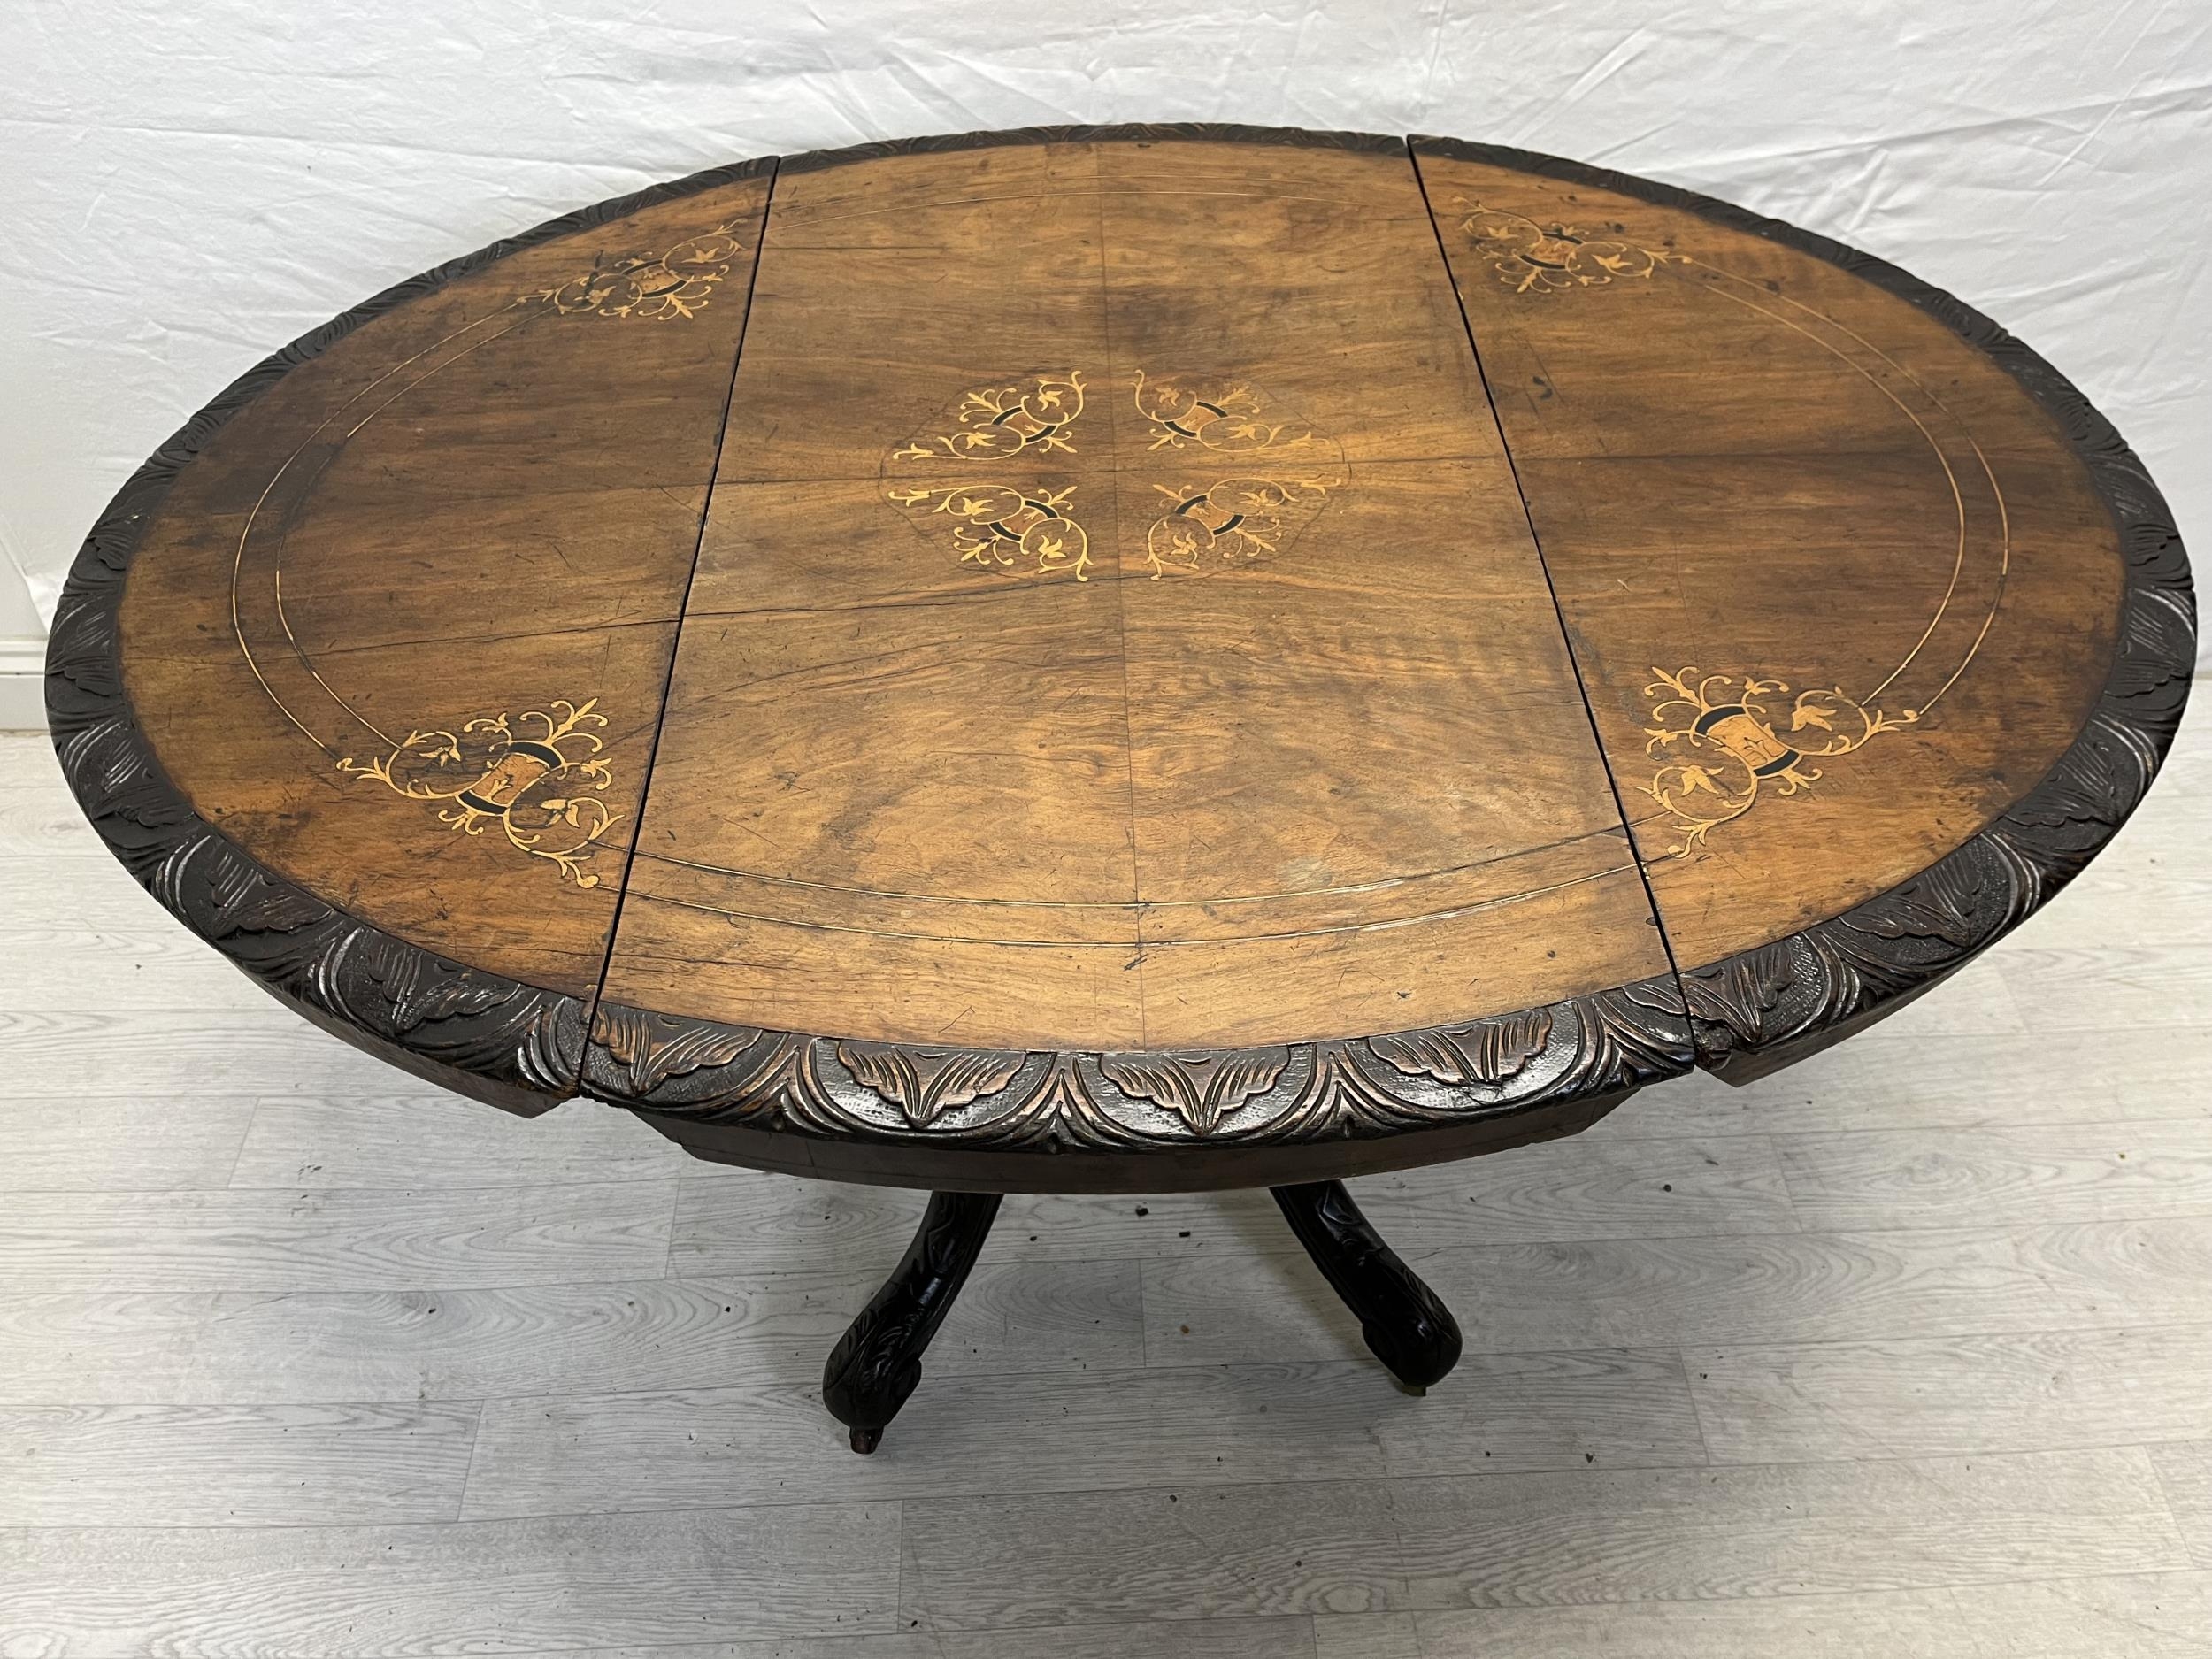 Dining table, 19th century walnut and satinwood inlaid. H.71 W.51 D.99.5cm. Extended W.132.5cm. - Image 5 of 7